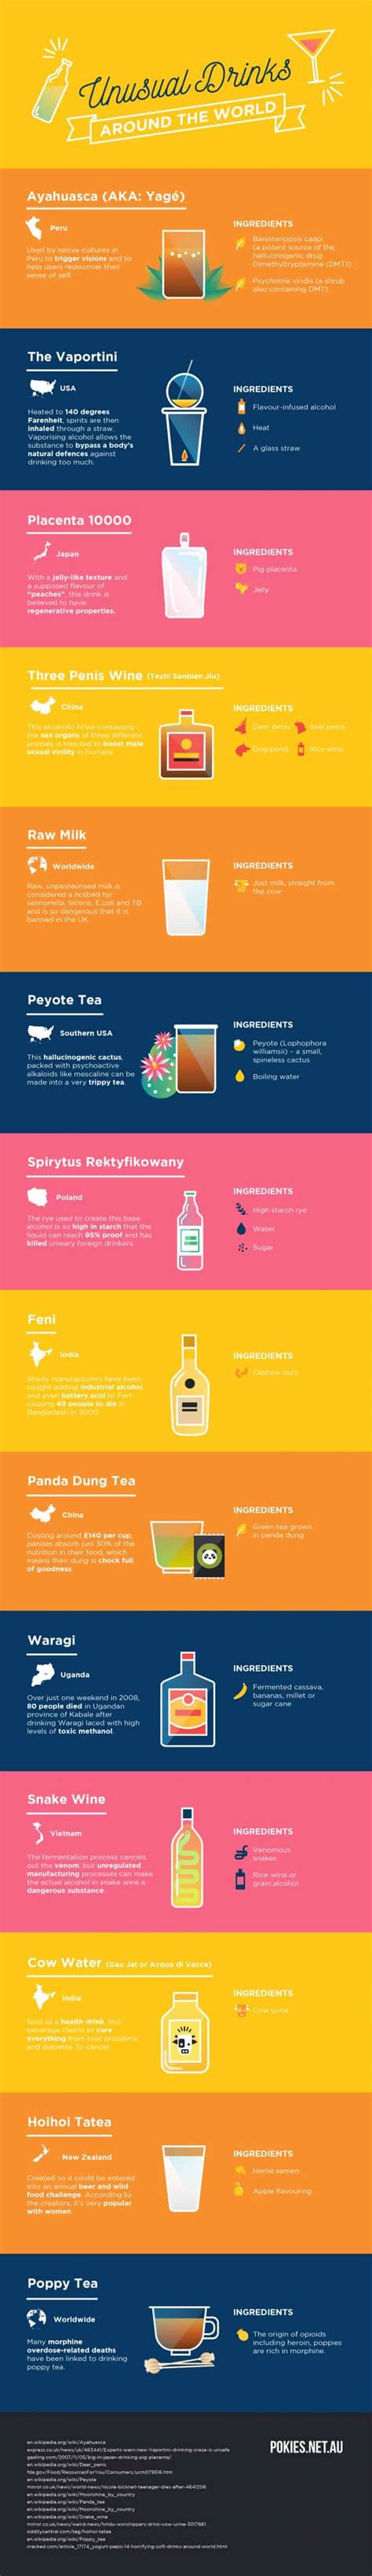 The Most Unusual Drinks Around The World Daily Infographic